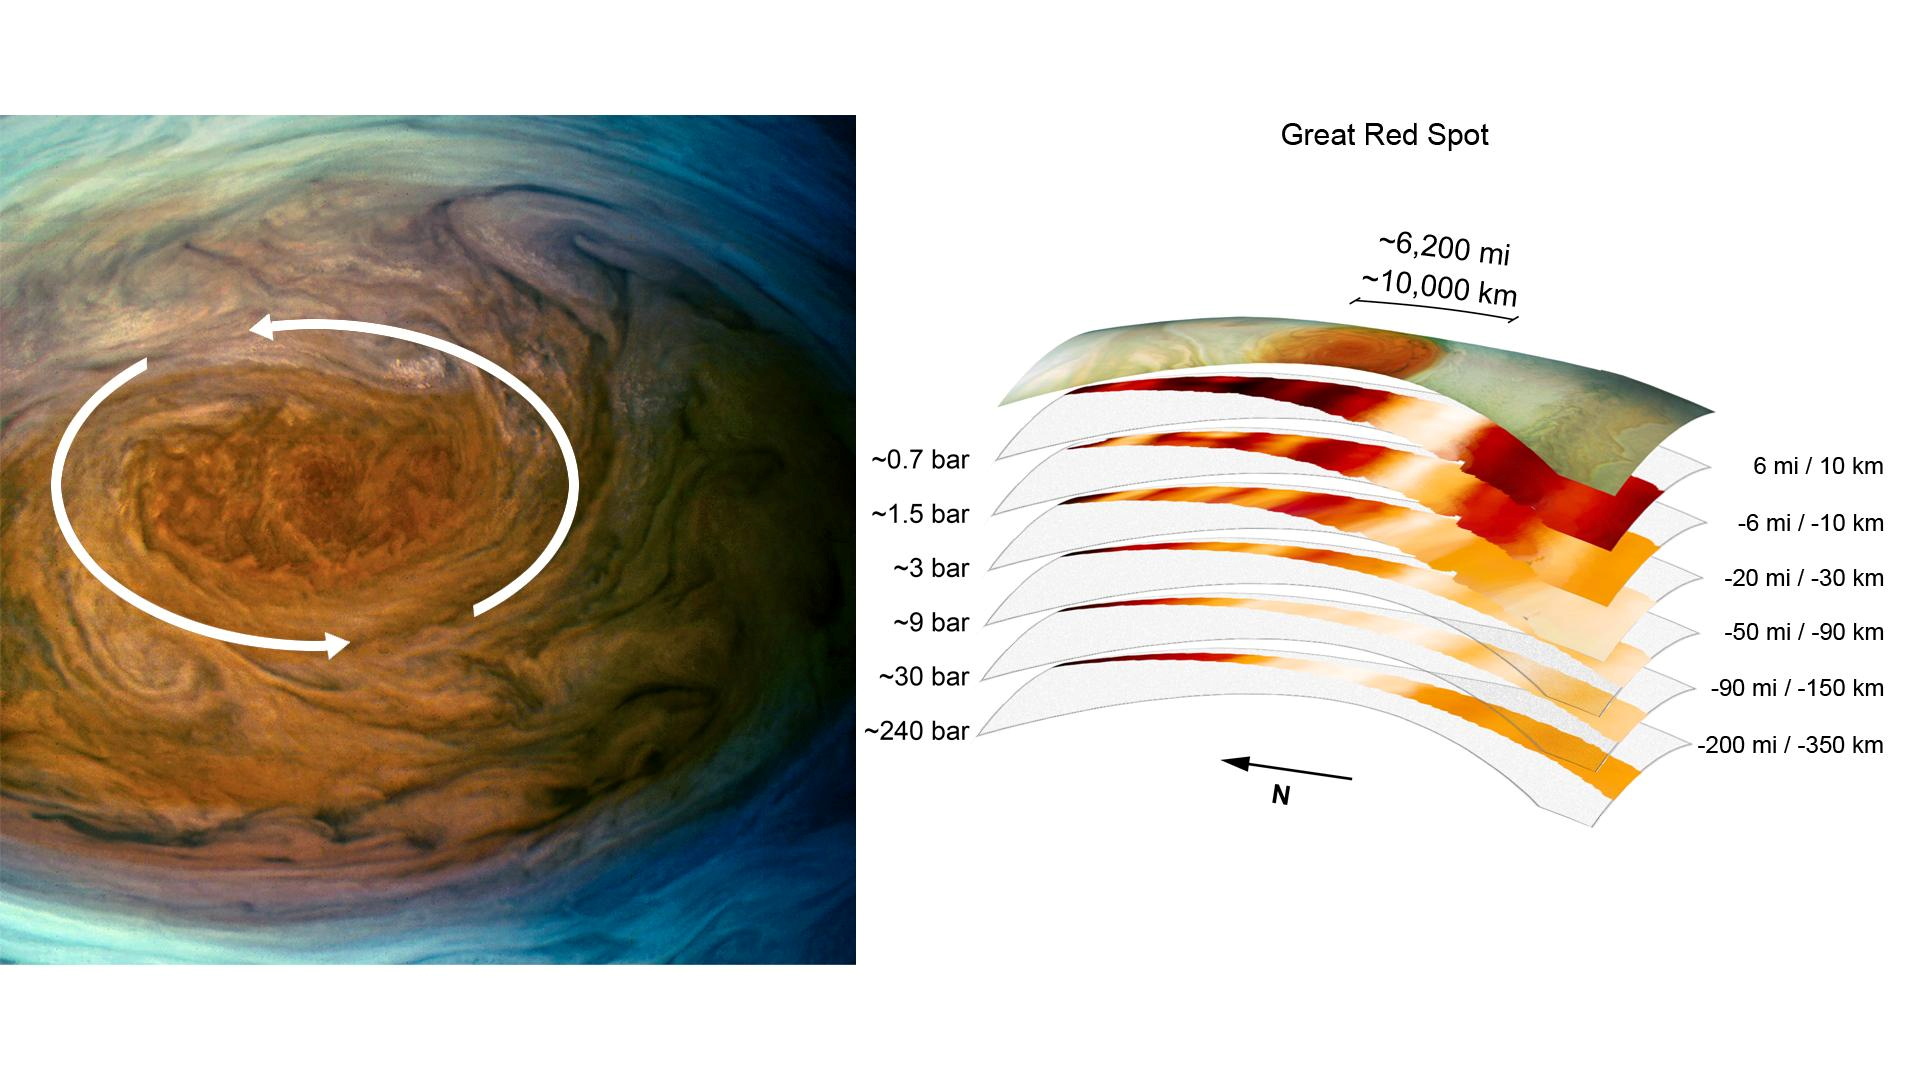 NASA's Juno spacecraft depicts the anticyclonic rotation of Jupiter's Great Red Spot, as the spacecraft performed a low flyby of Jupiter